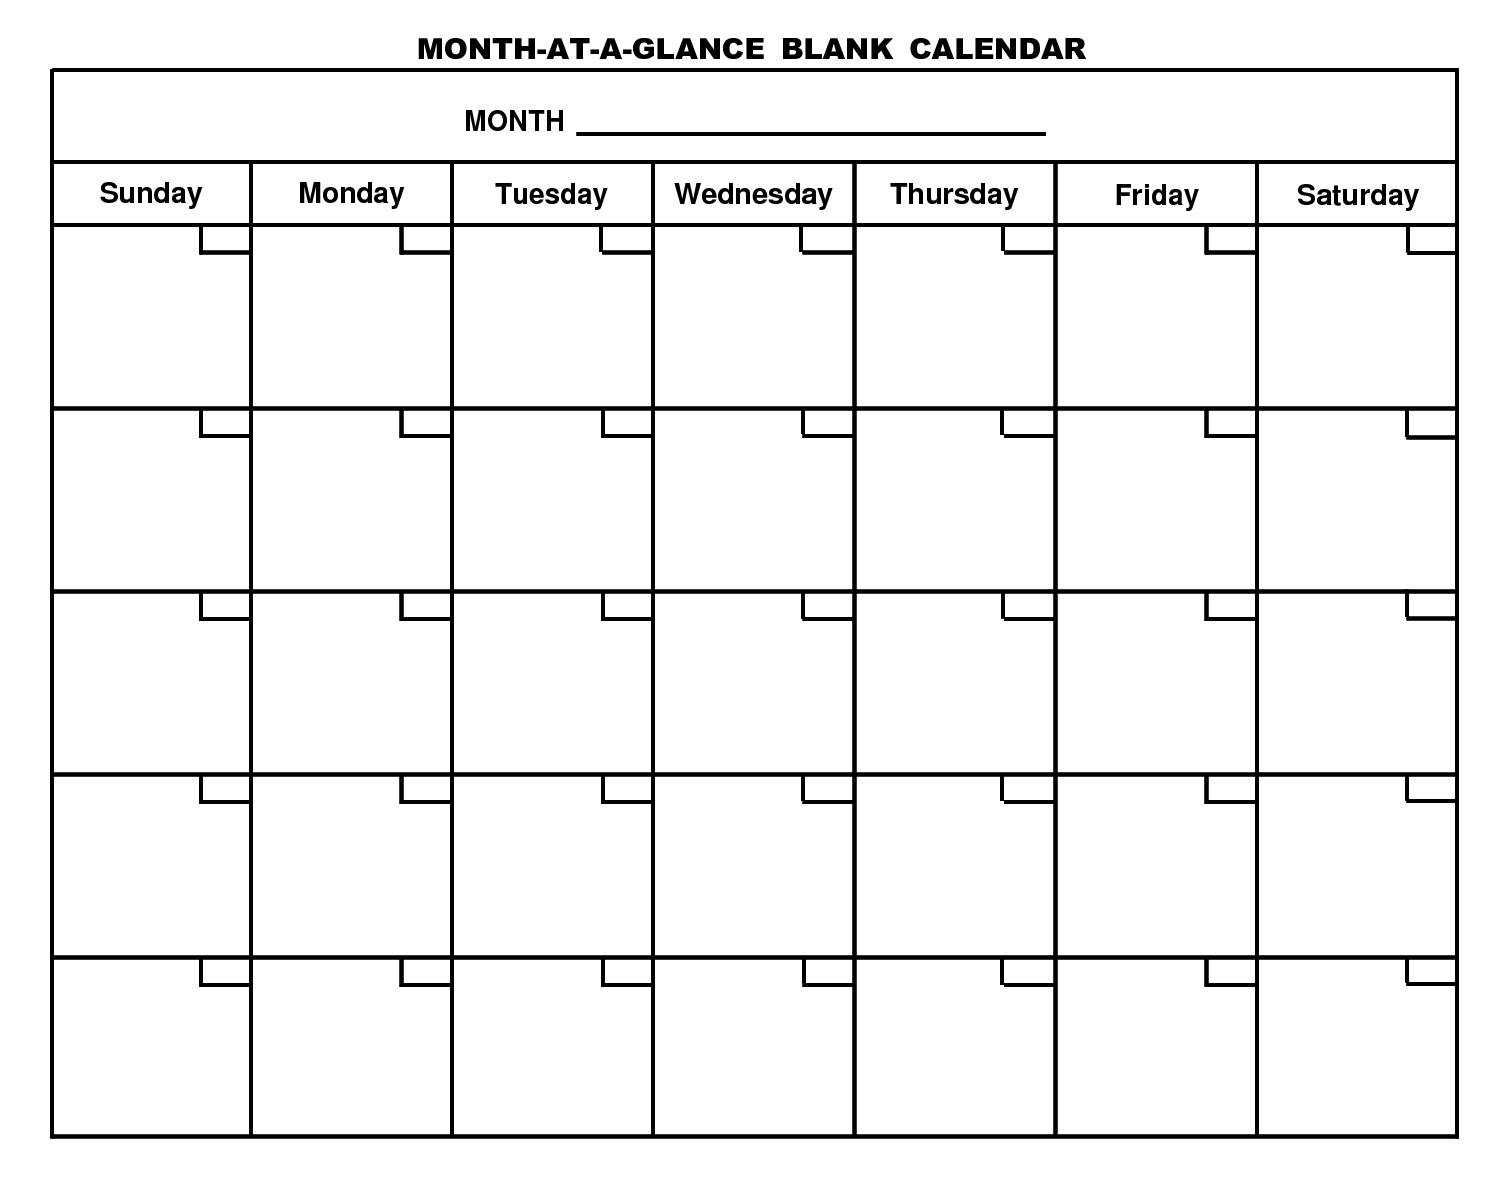 Month At A Glance Blank Calendar Template - Dalep.midnightpig.co With Regard To Blank Calender Template